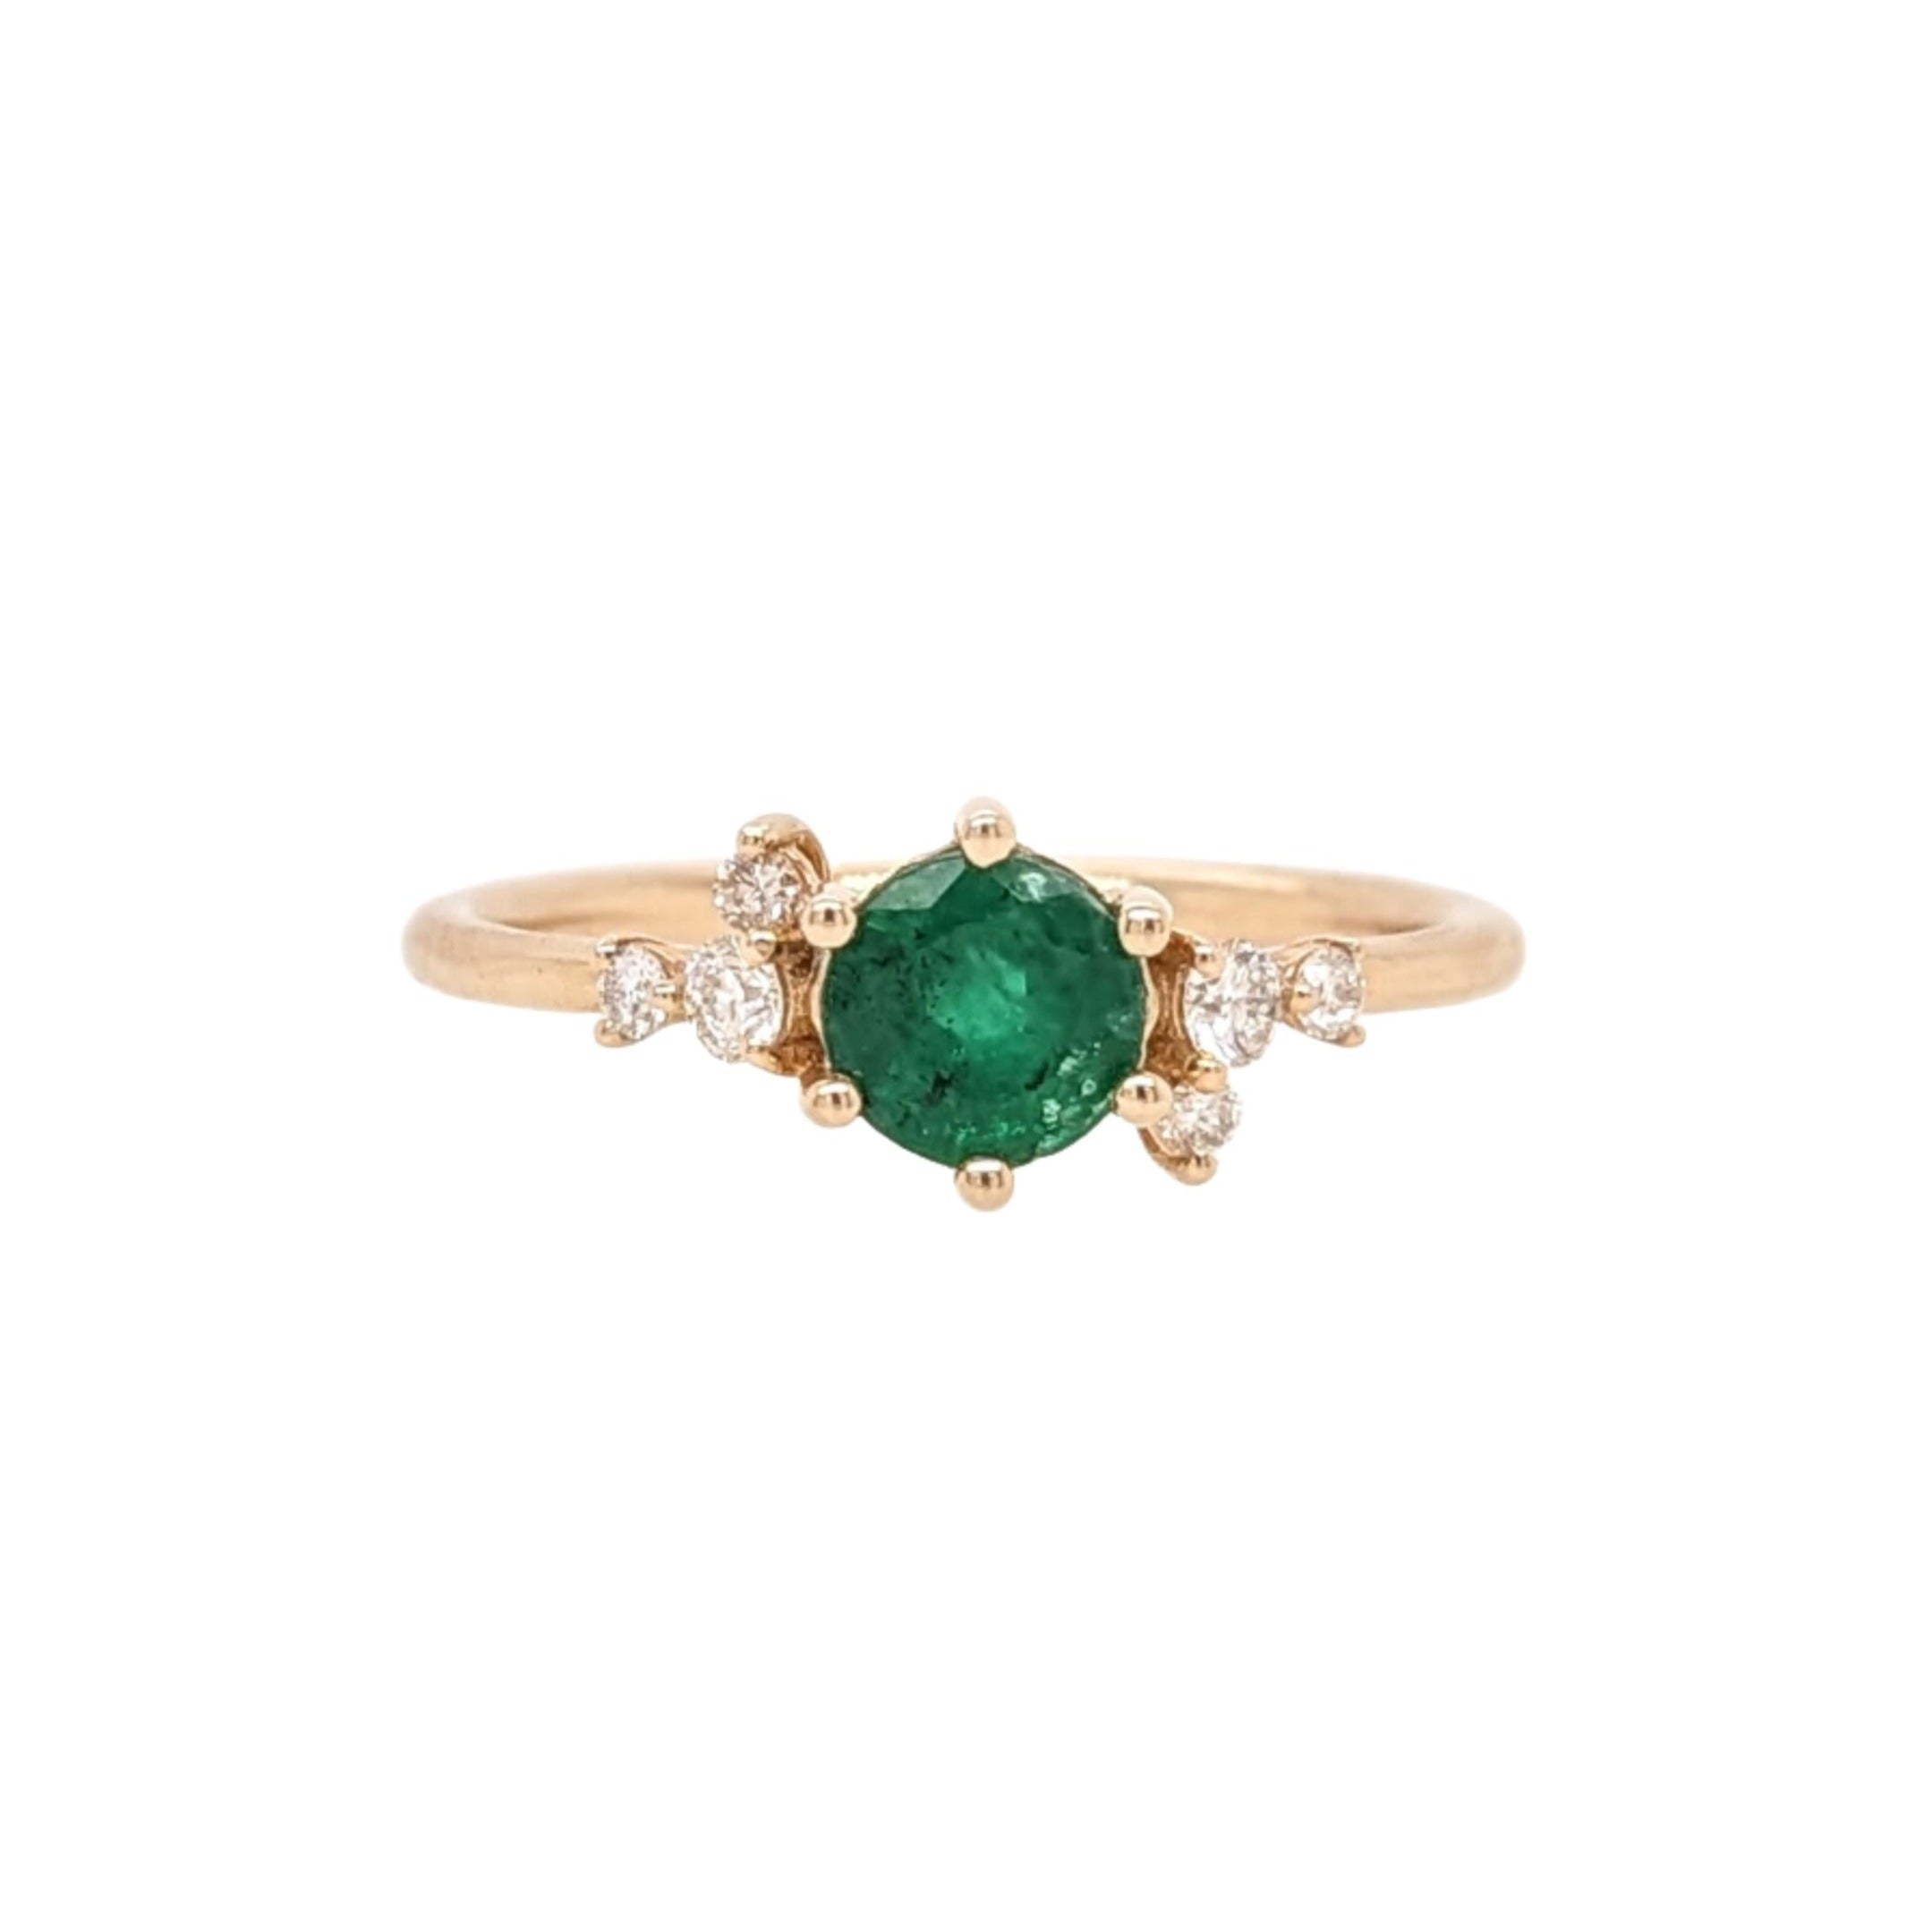 Green Emerald Ring w Earth Mined Diamonds in Solid 14k Yellow Gold Round 5mm